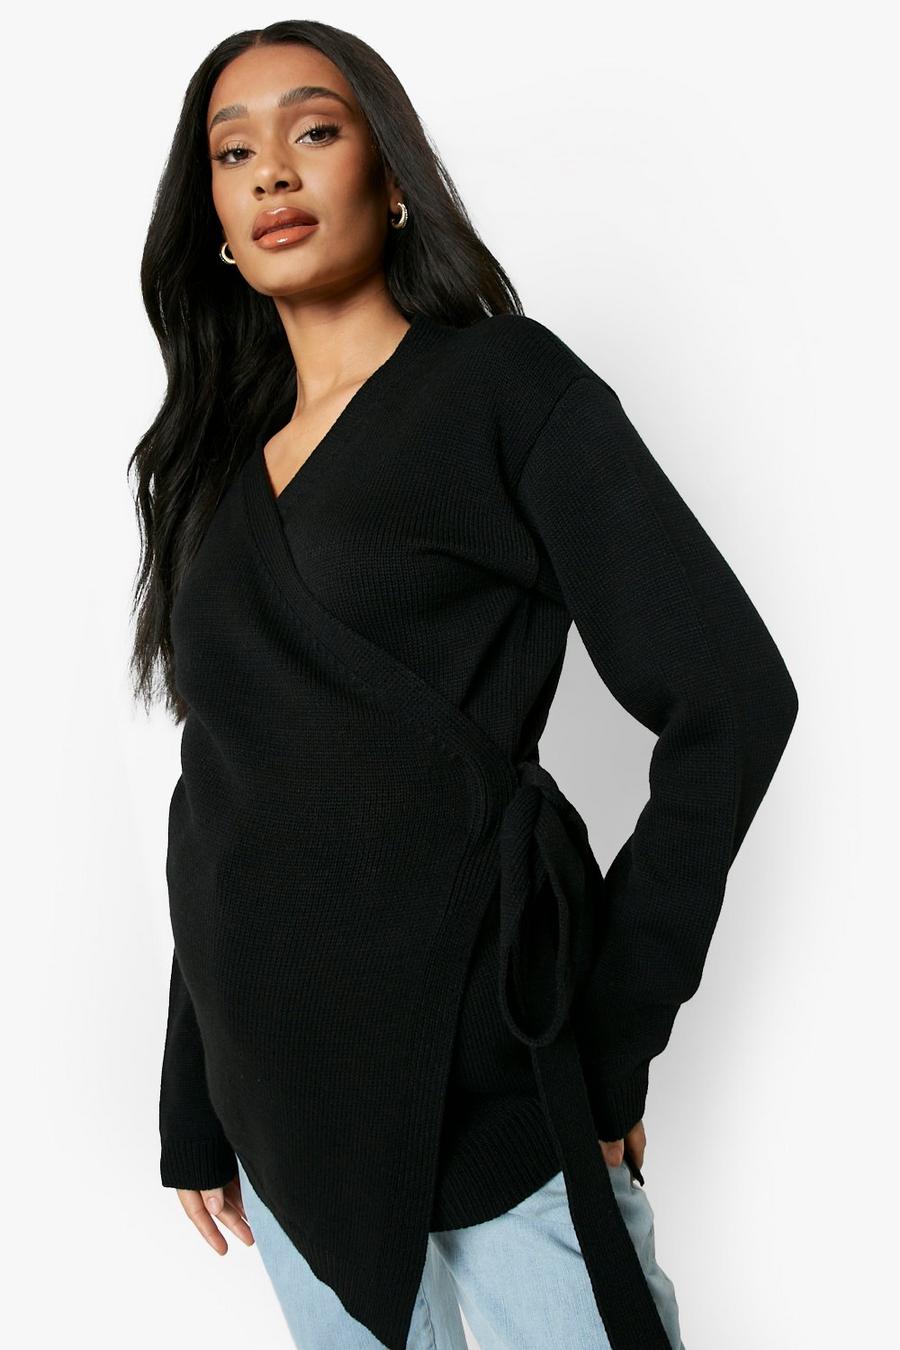 Black Maternity Grow With Me Tie Side Cardigan